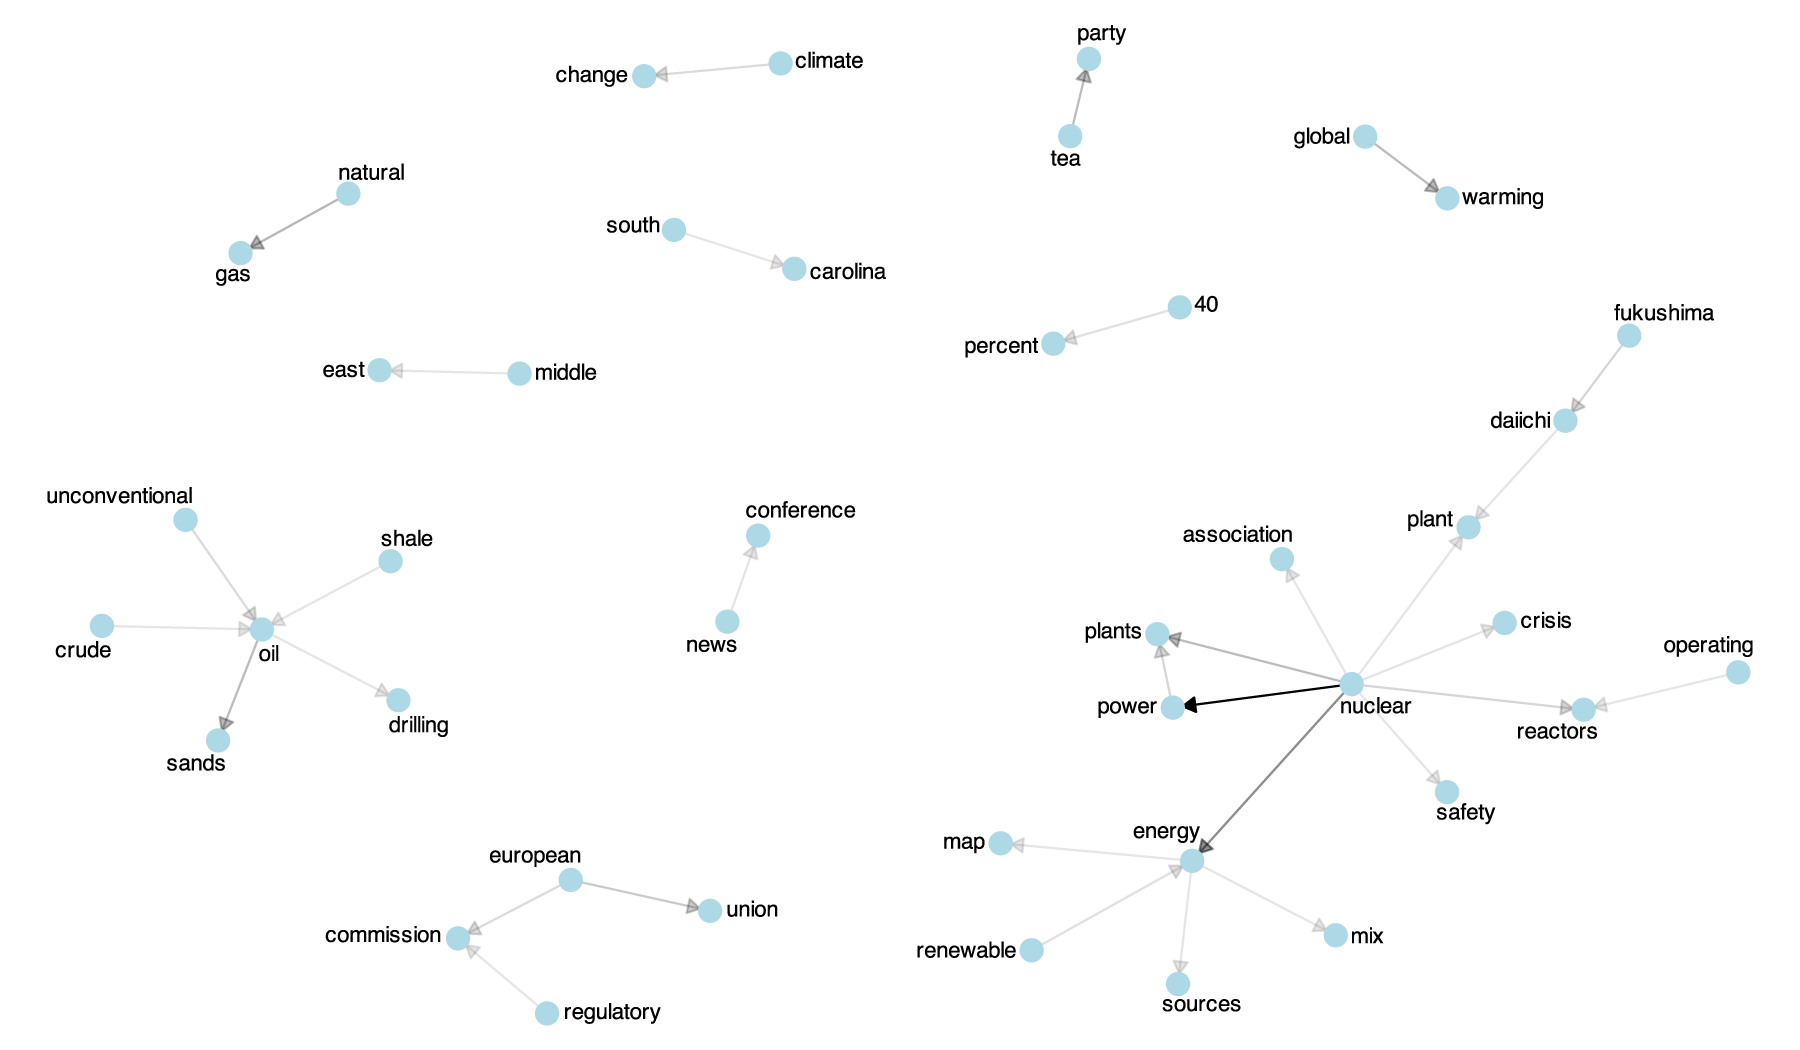 Network map of topics discussed in the news media in 2011